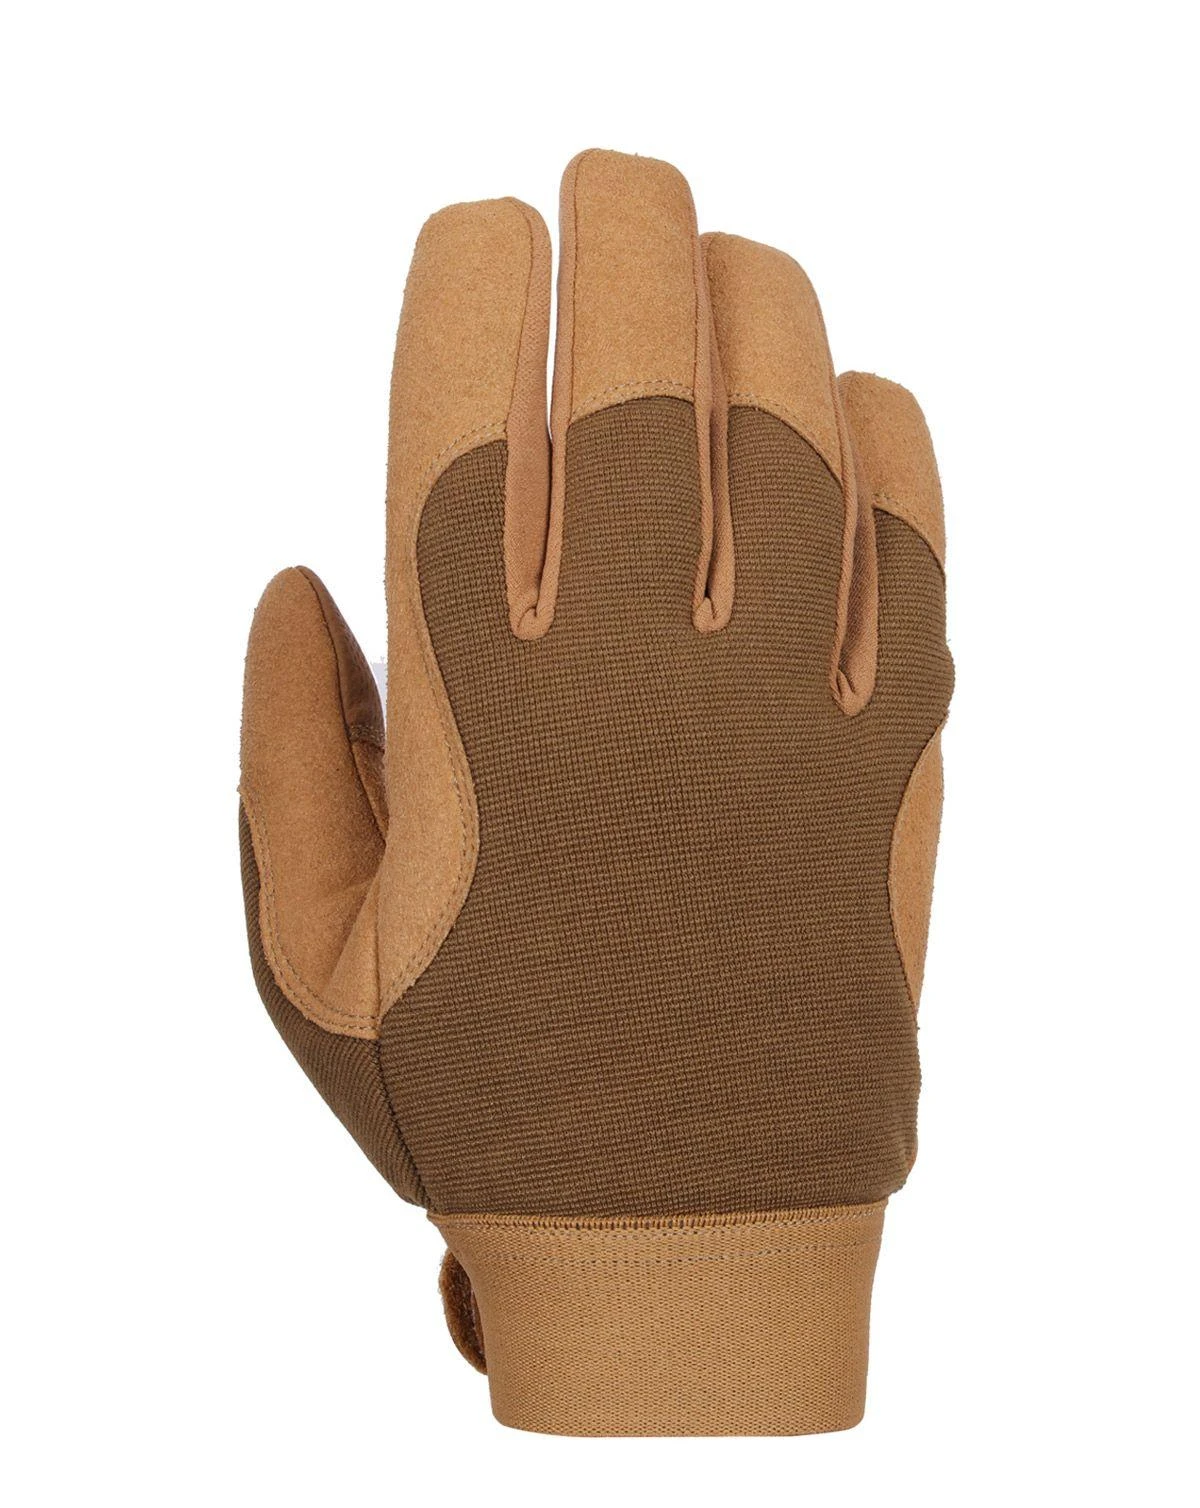 Buy [Gloves & Mittens | ARMY STAR | Money Guarantee Back